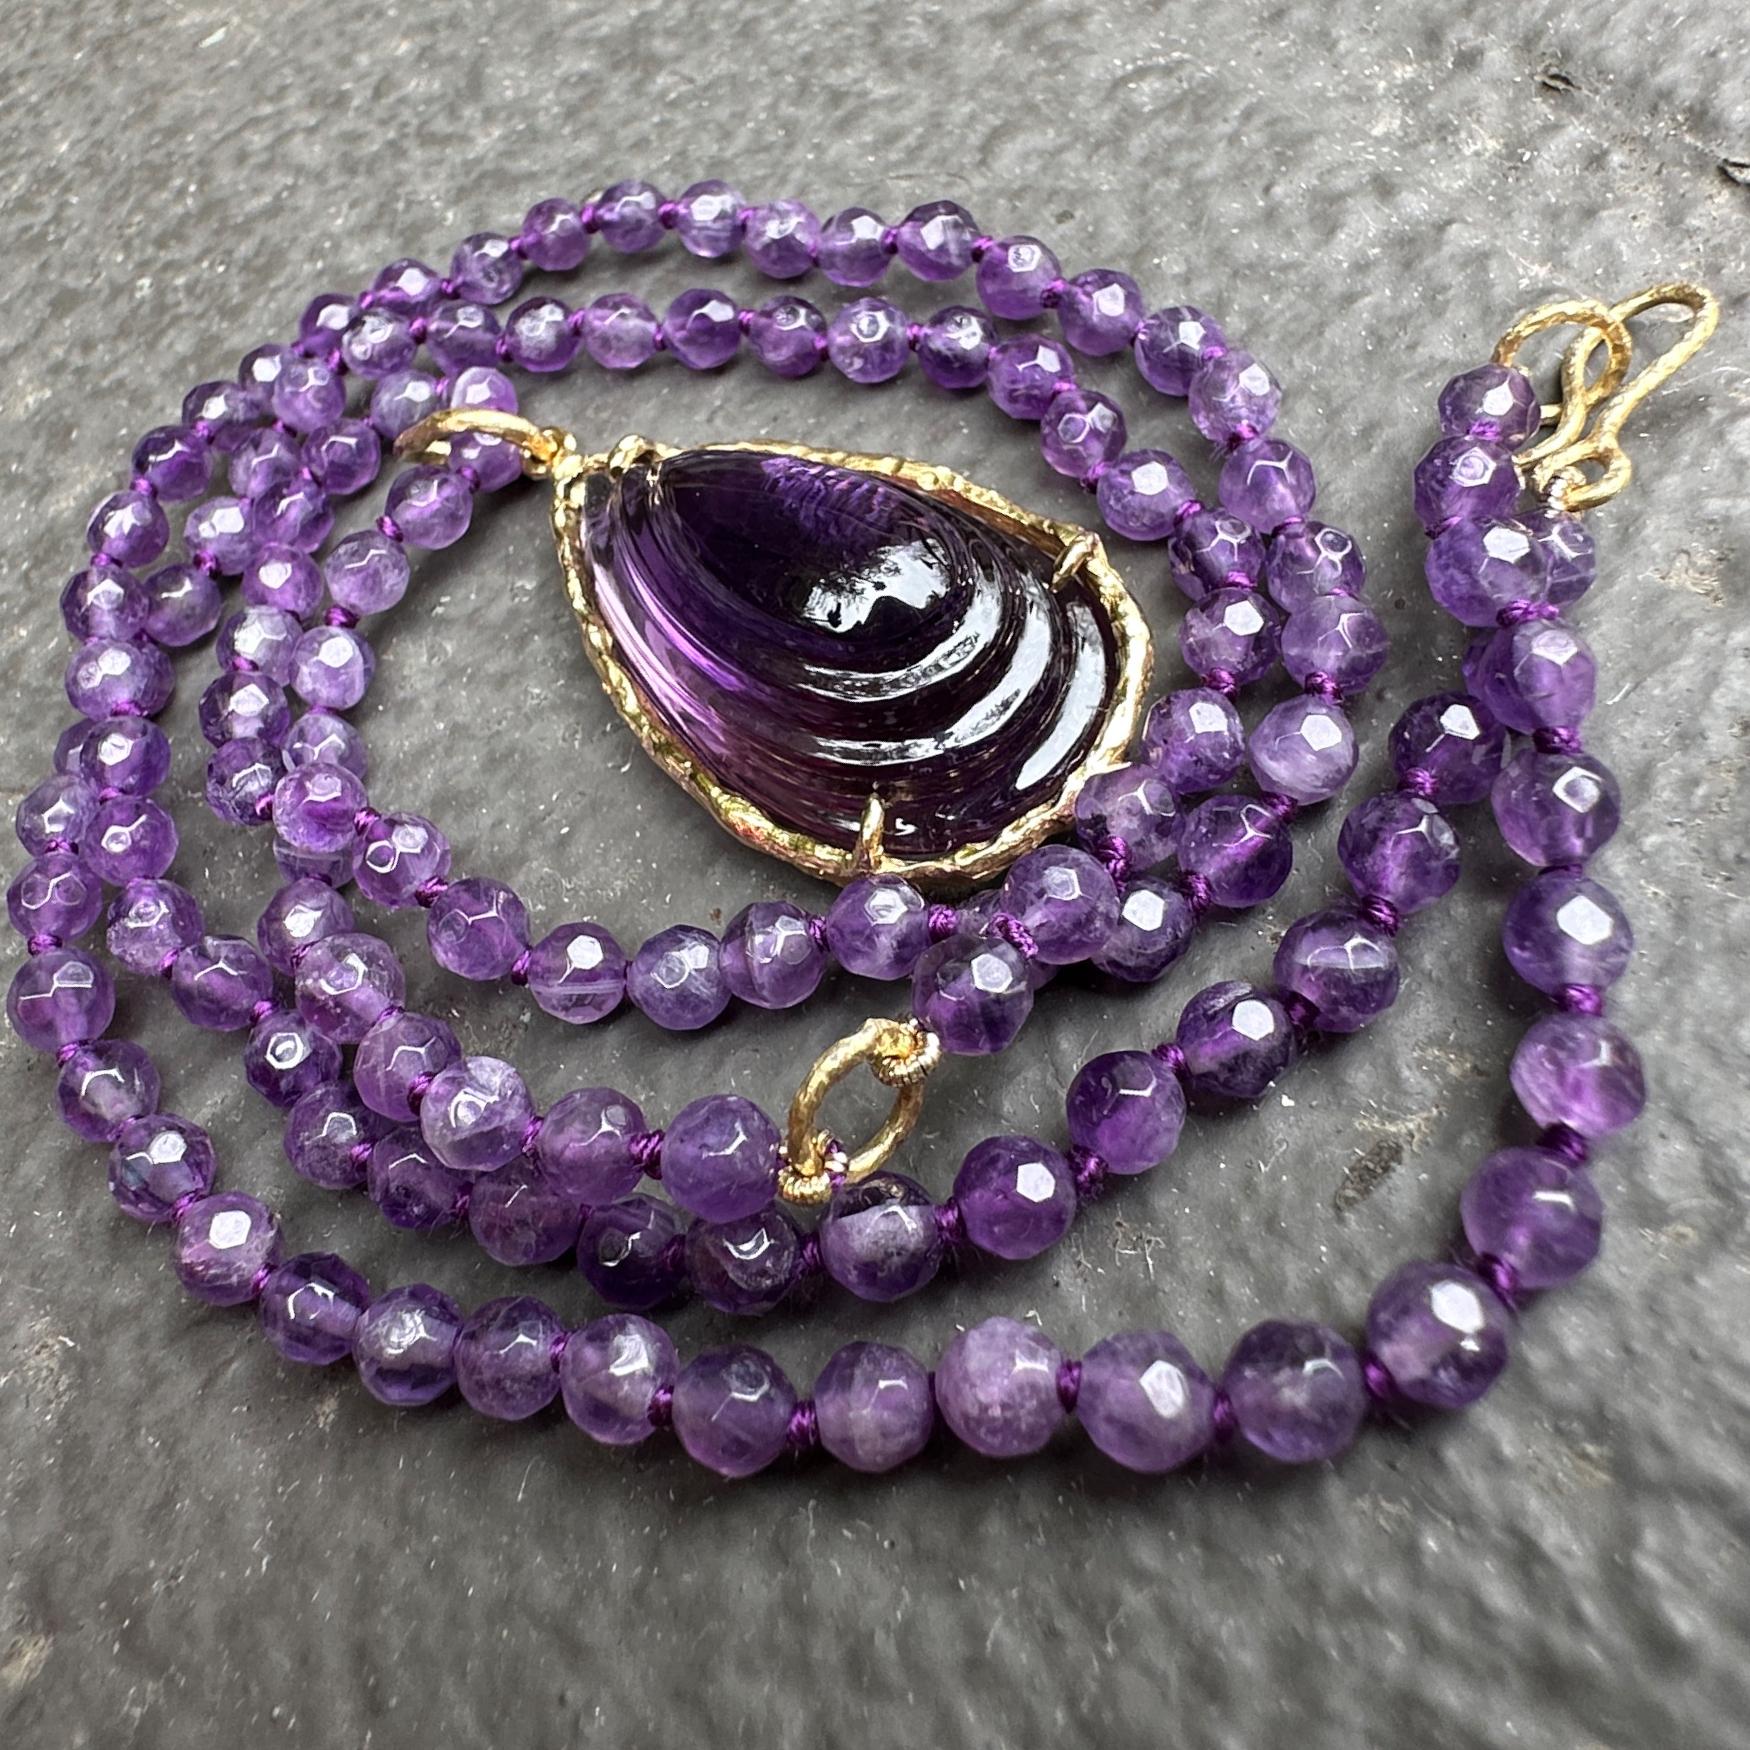 39 Carat Carved Amethyst Pendant in 18K Gold on Convertible Amethyst Bead Chain For Sale 6